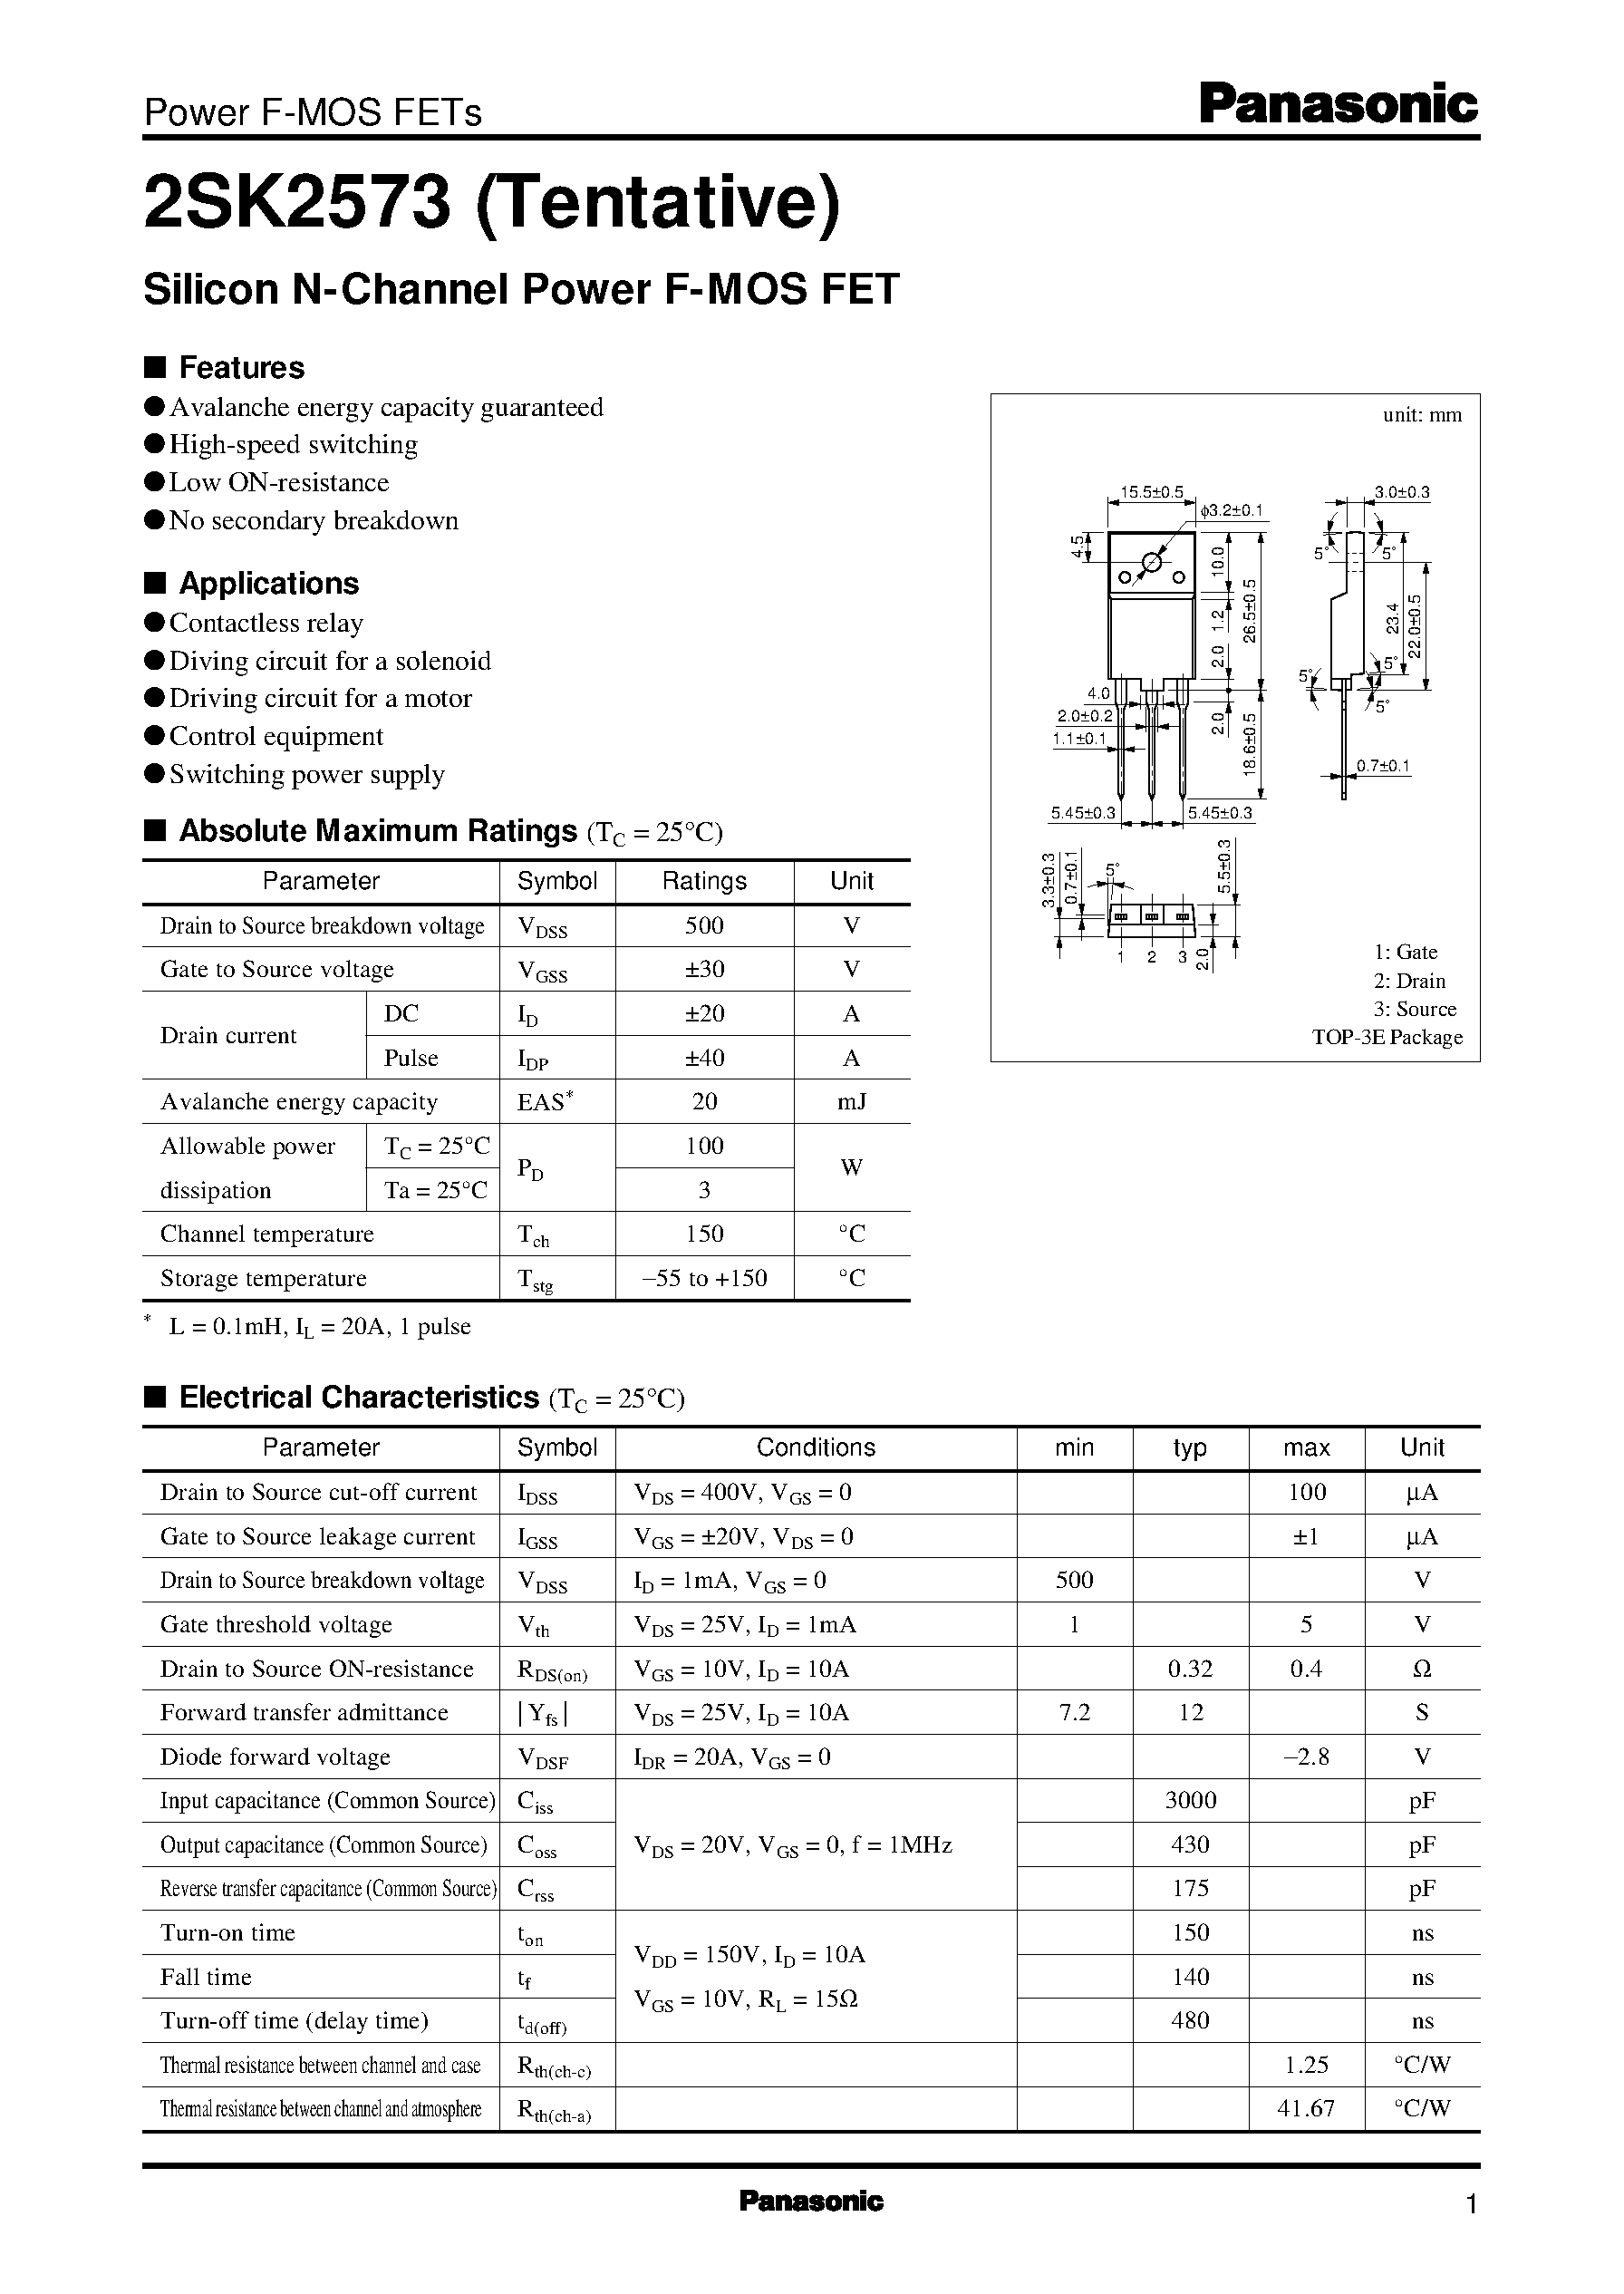 Datasheet 2SK2573 - Silicon N-Channel Power F-MOS FET page 1